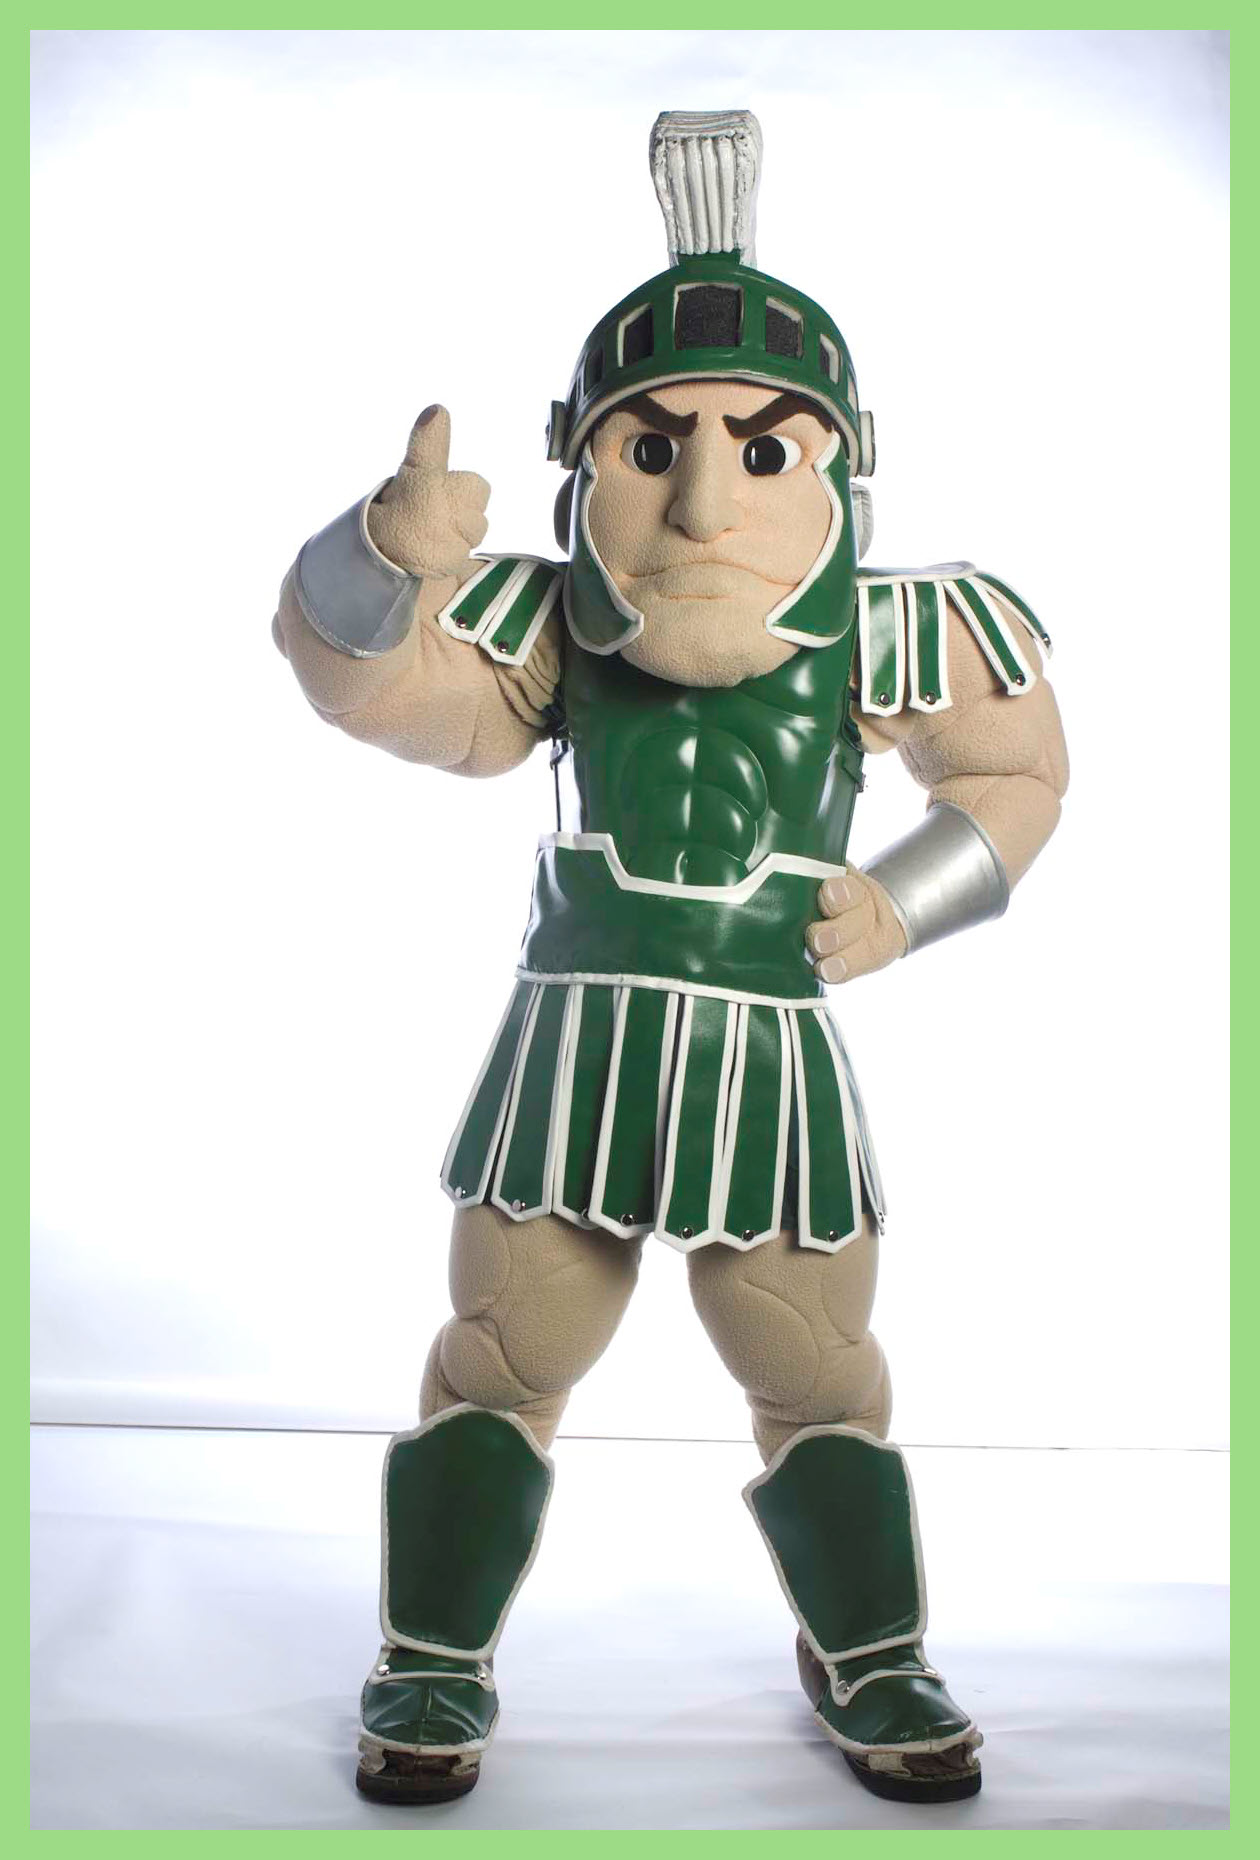 Sparty giving a thumbs up.